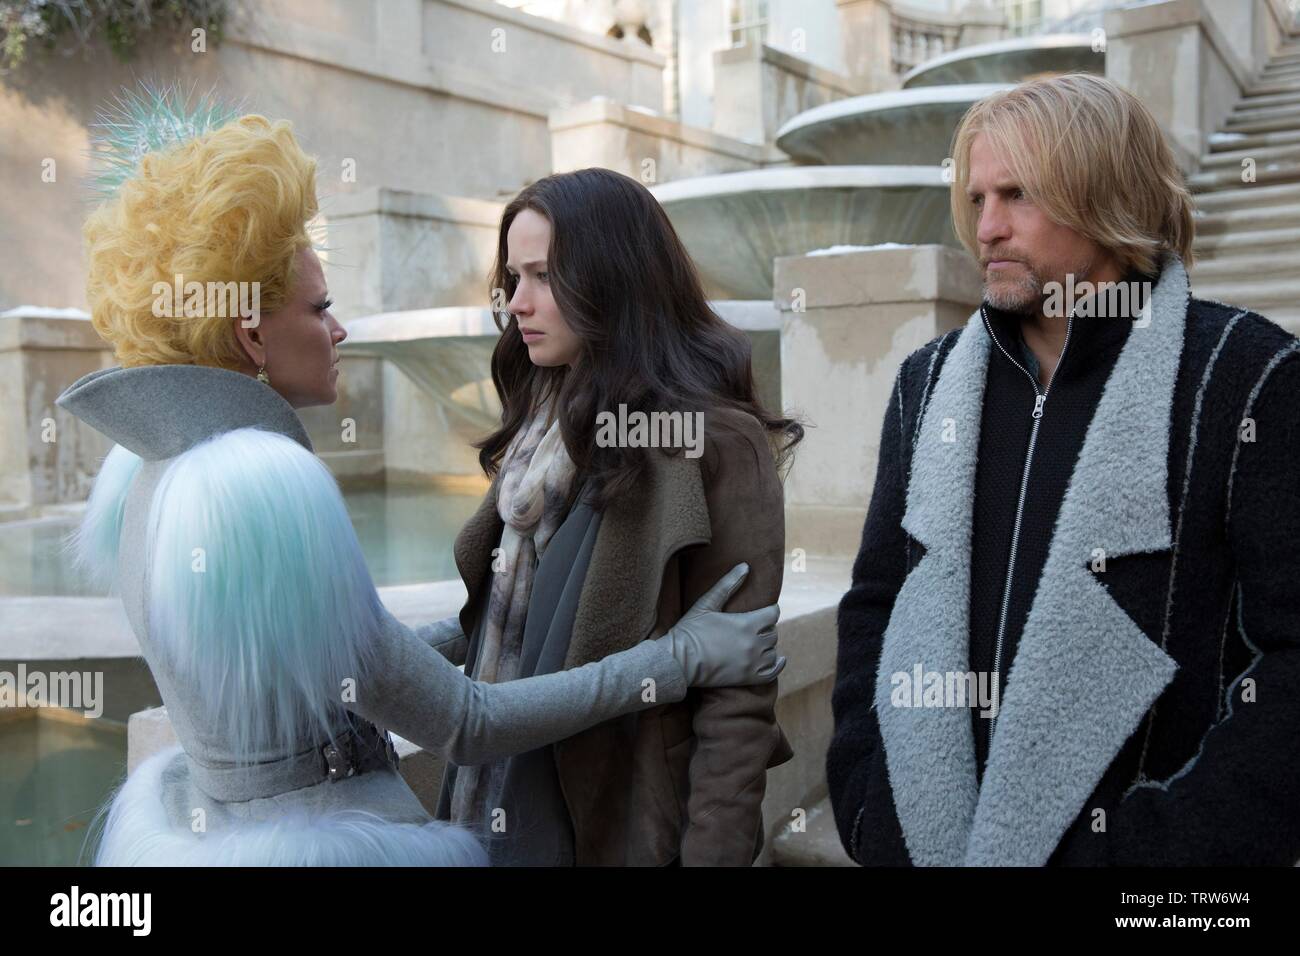 WOODY HARRELSON , ELIZABETH BANKS and JENNIFER LAWRENCE in THE HUNGER GAMES: MOCKINGJAY-PART 2 (2015). Copyright: Editorial use only. No merchandising or book covers. This is a publicly distributed handout. Access rights only, no license of copyright provided. Only to be reproduced in conjunction with promotion of this film. Credit: COLOR FORCE/LIONGATE/STUDIO BABELSBERG / CLOSE, MURRAY / Album Stock Photo